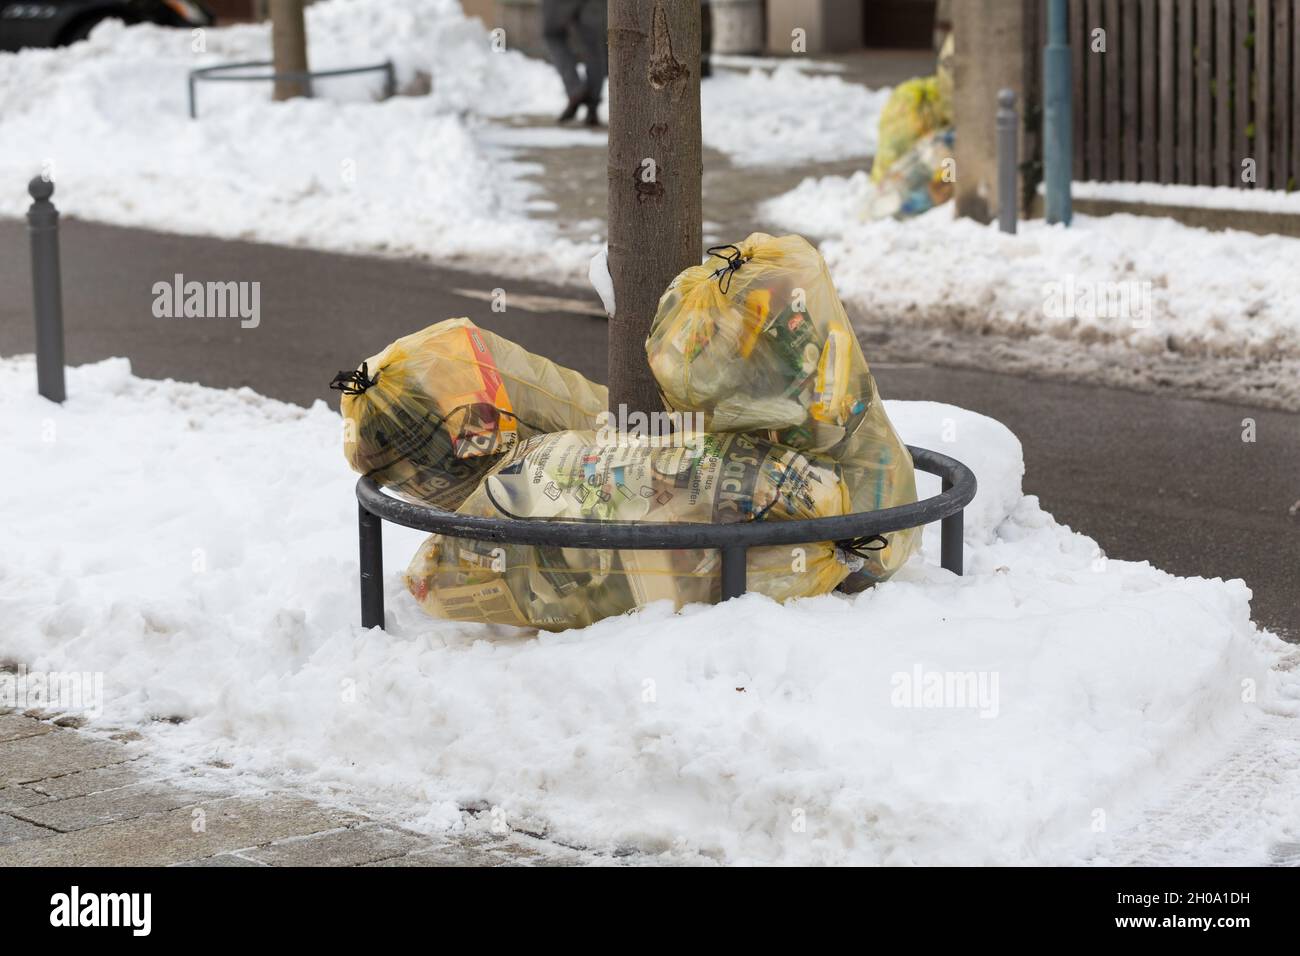 Starnberg, Germany - Jan 19, 2021: Several yellow garbage bags (Gelber Sack) with recyclable waste. At a sidewalk, during winter. Stock Photo